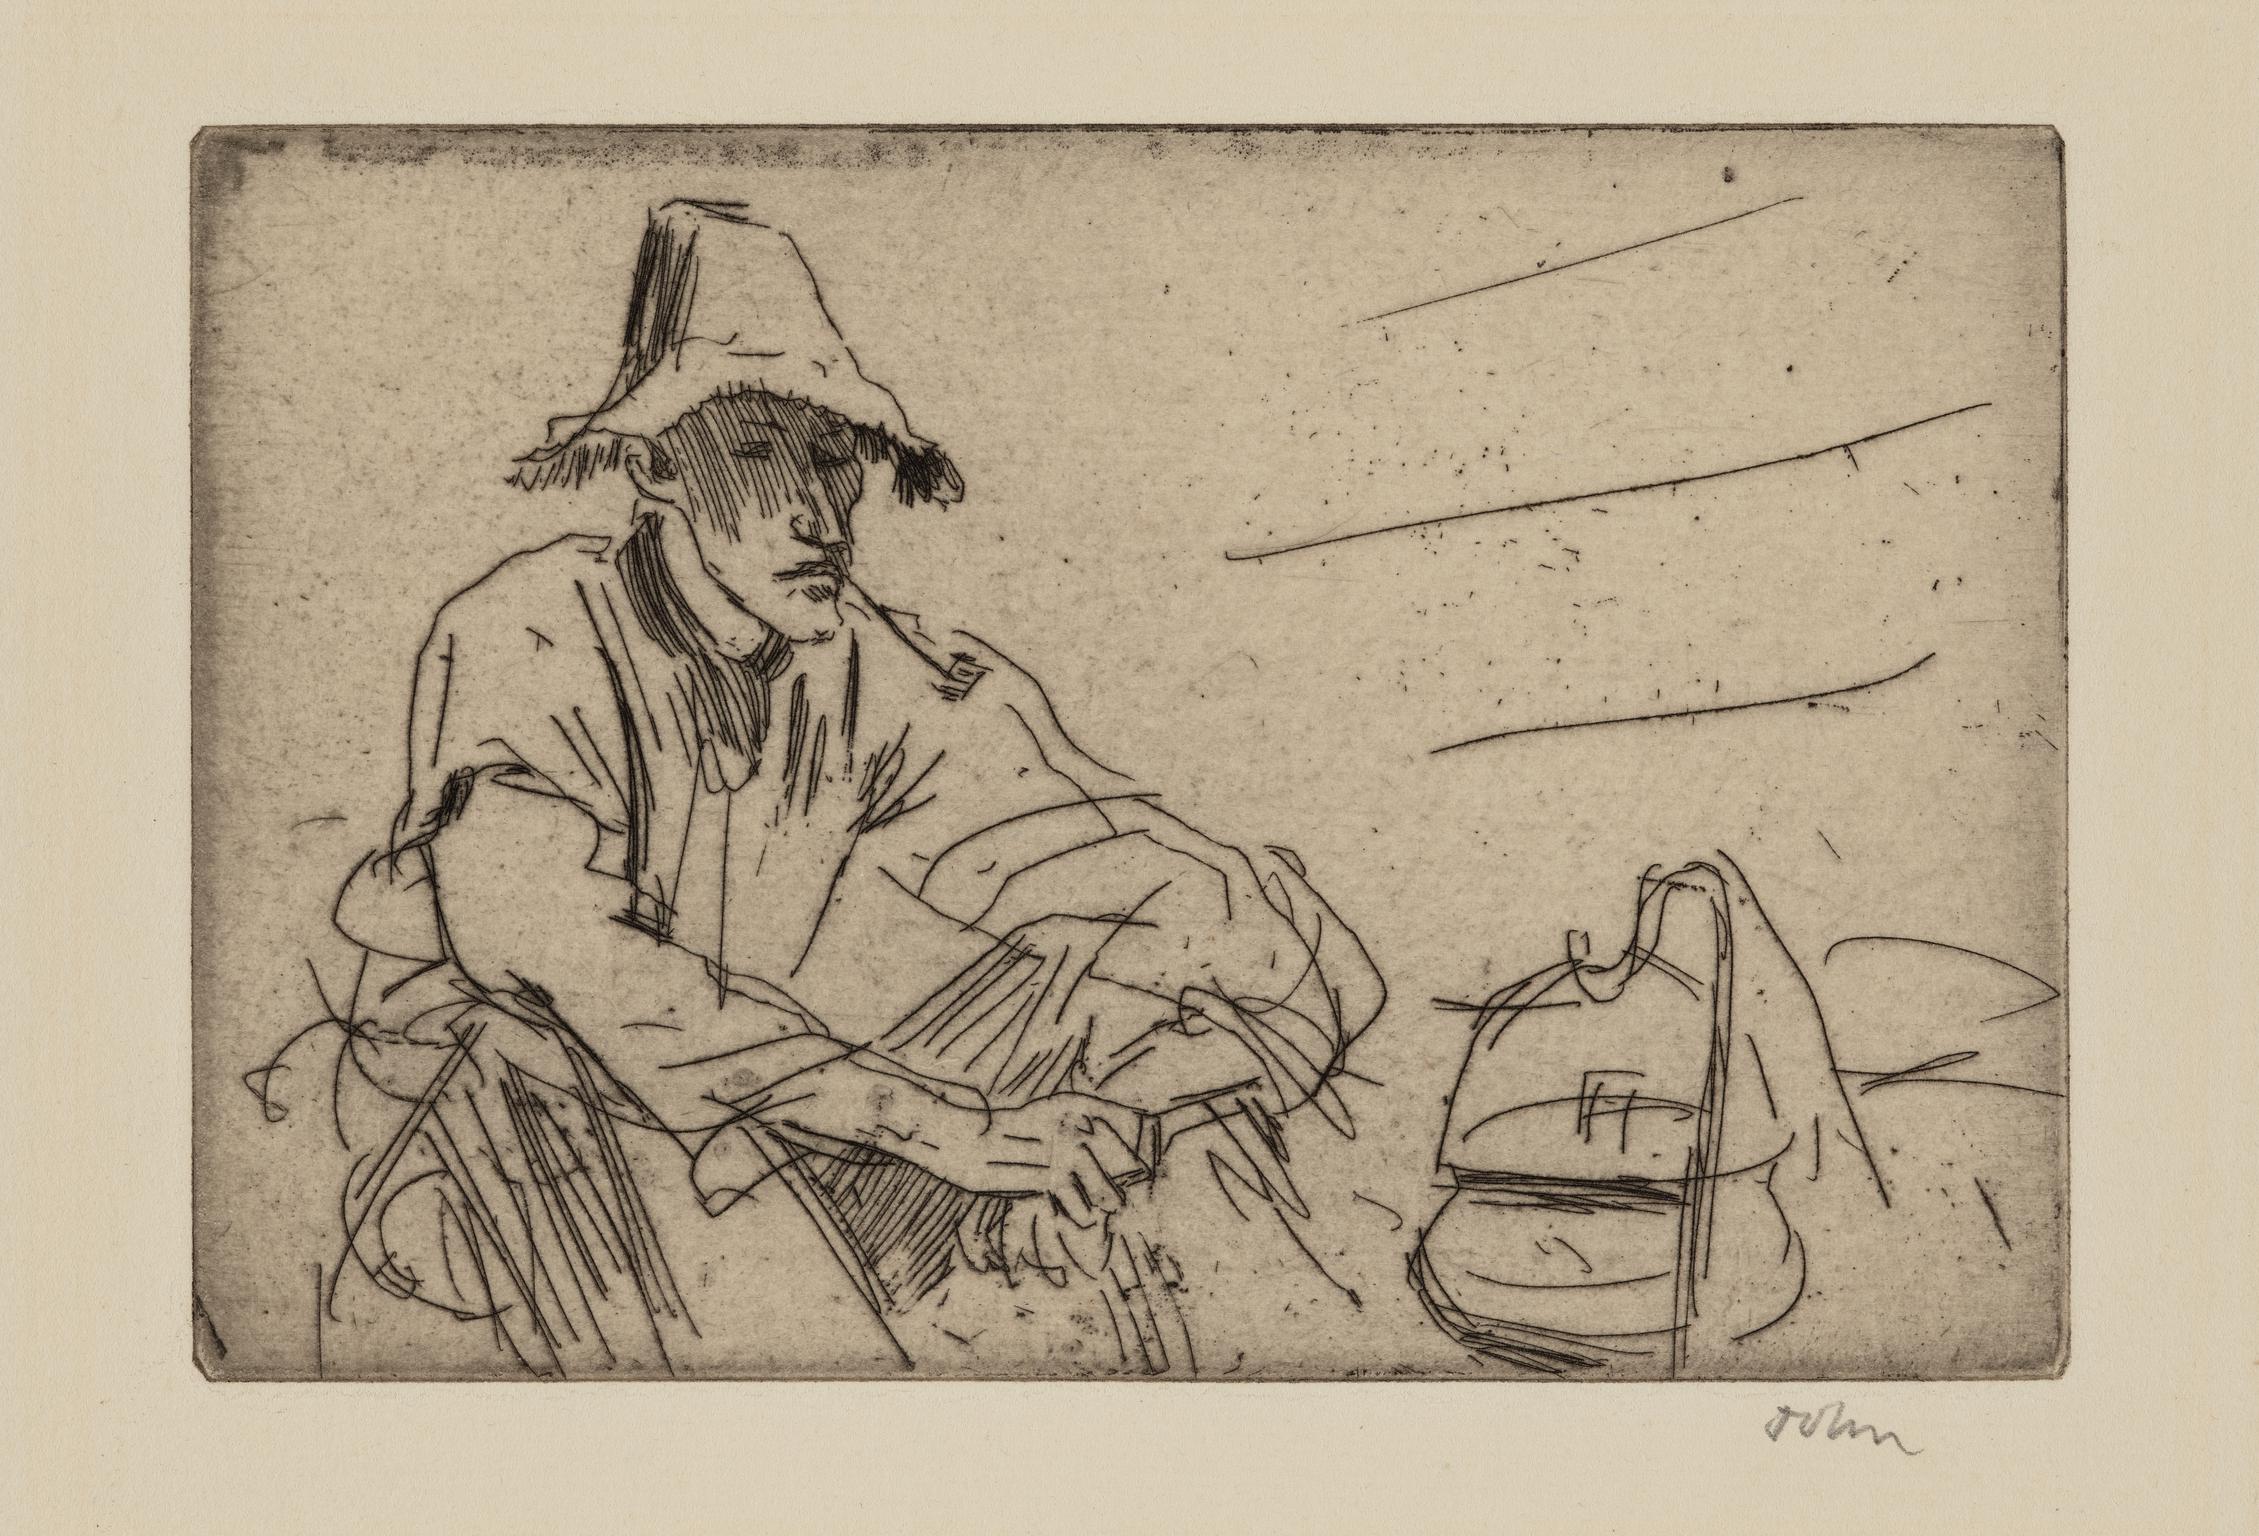 Sketch of a Man at a Camp Fire